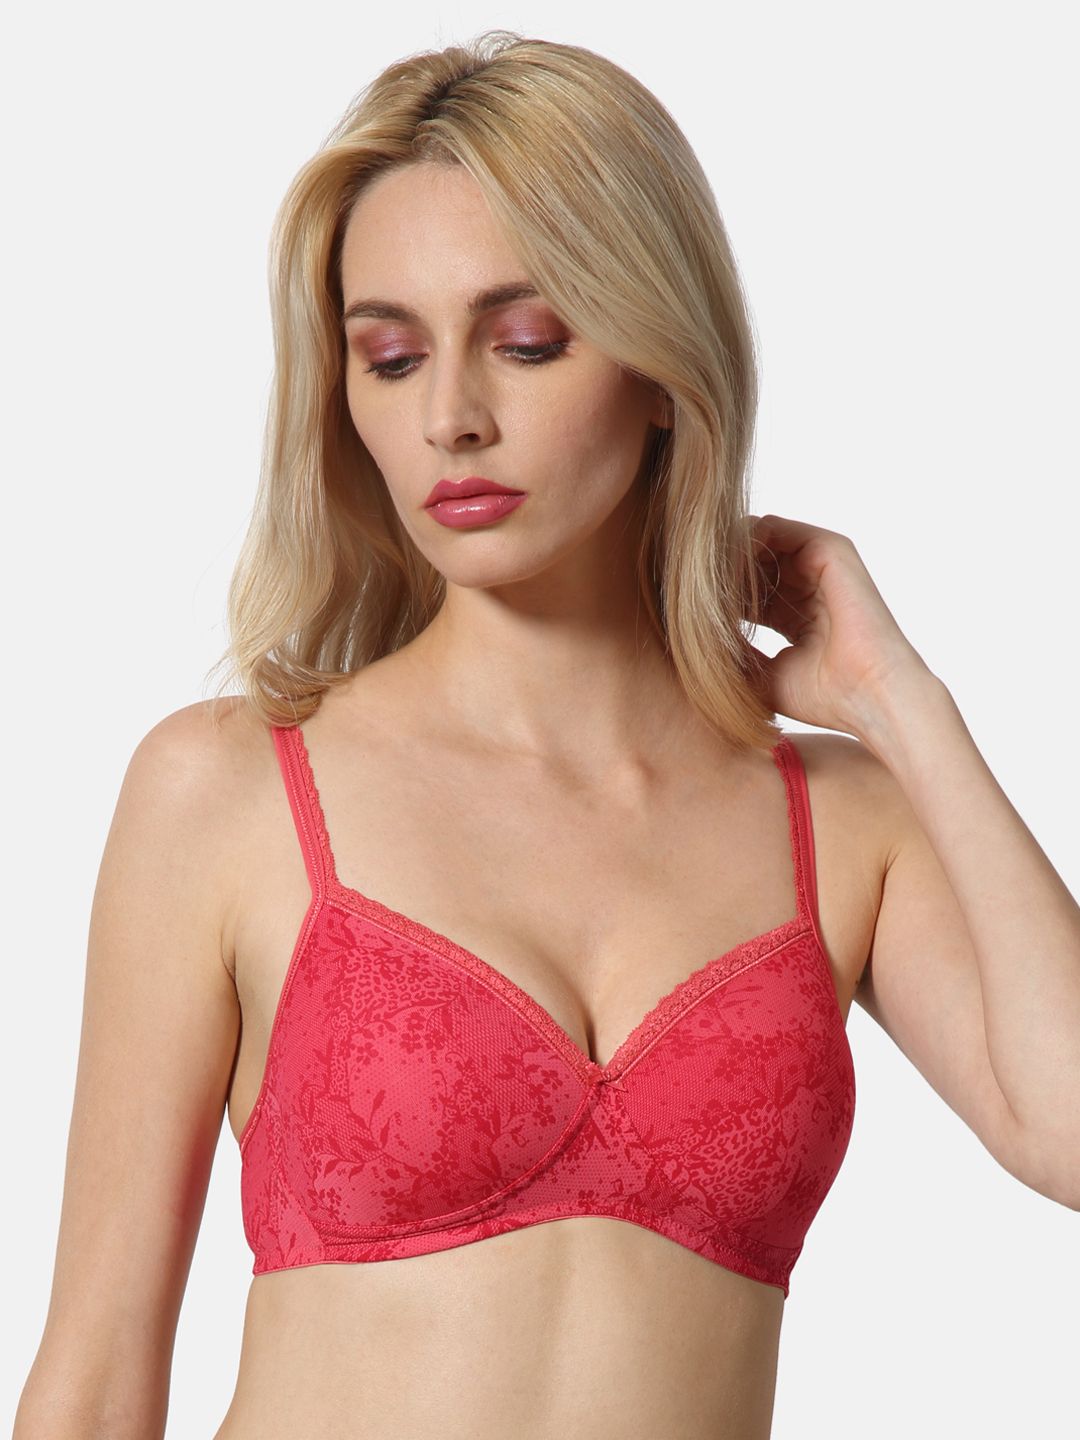 Van Heusen Coral Pink Printed Non-Wired Lightly Padded Everyday Bra ILIBR1CSPIW7711003 Price in India